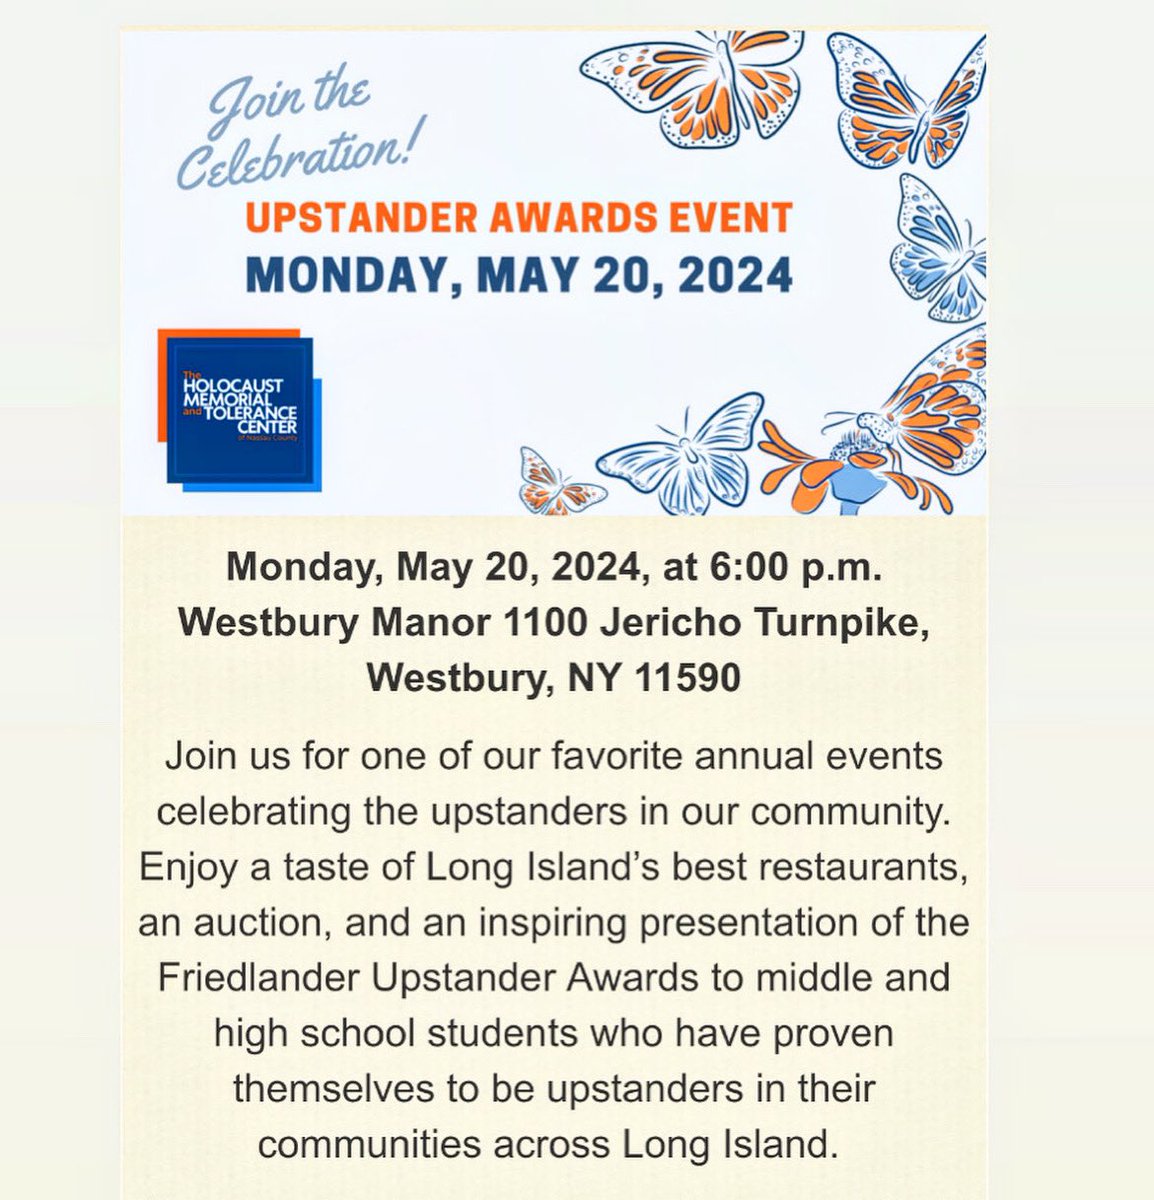 Join us Monday, May 20th at 6pm in Westbury! This is one of our favorite annual events celebrating local #upstanders. Tickets: interland3.donorperfect.net/weblink/weblin…